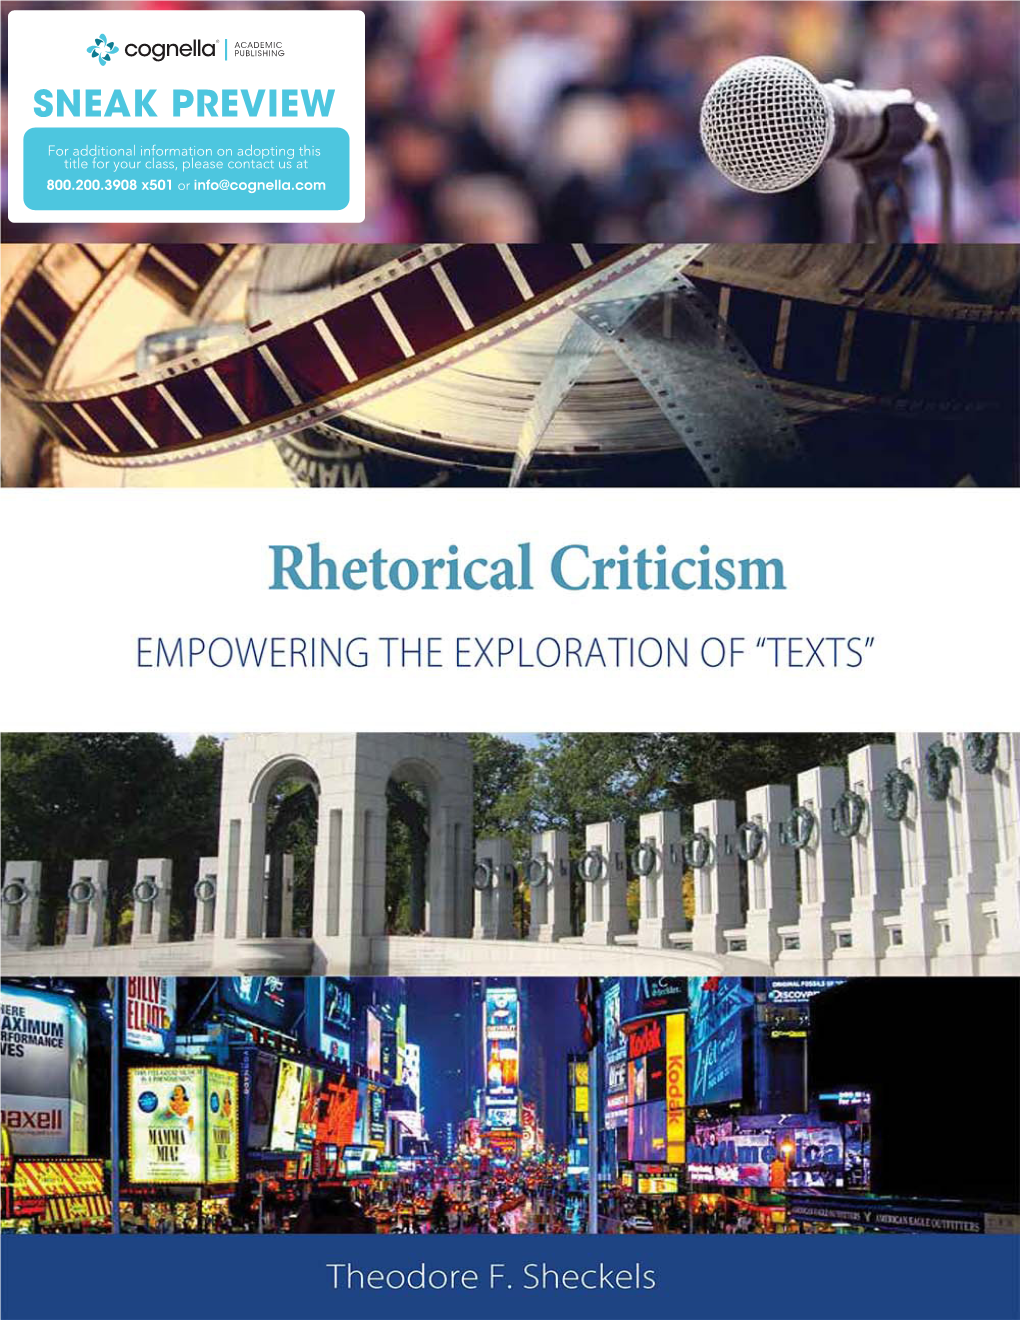 Rhetorical Criticism EMPOWERING the EXPLORATION of “TEXTS”